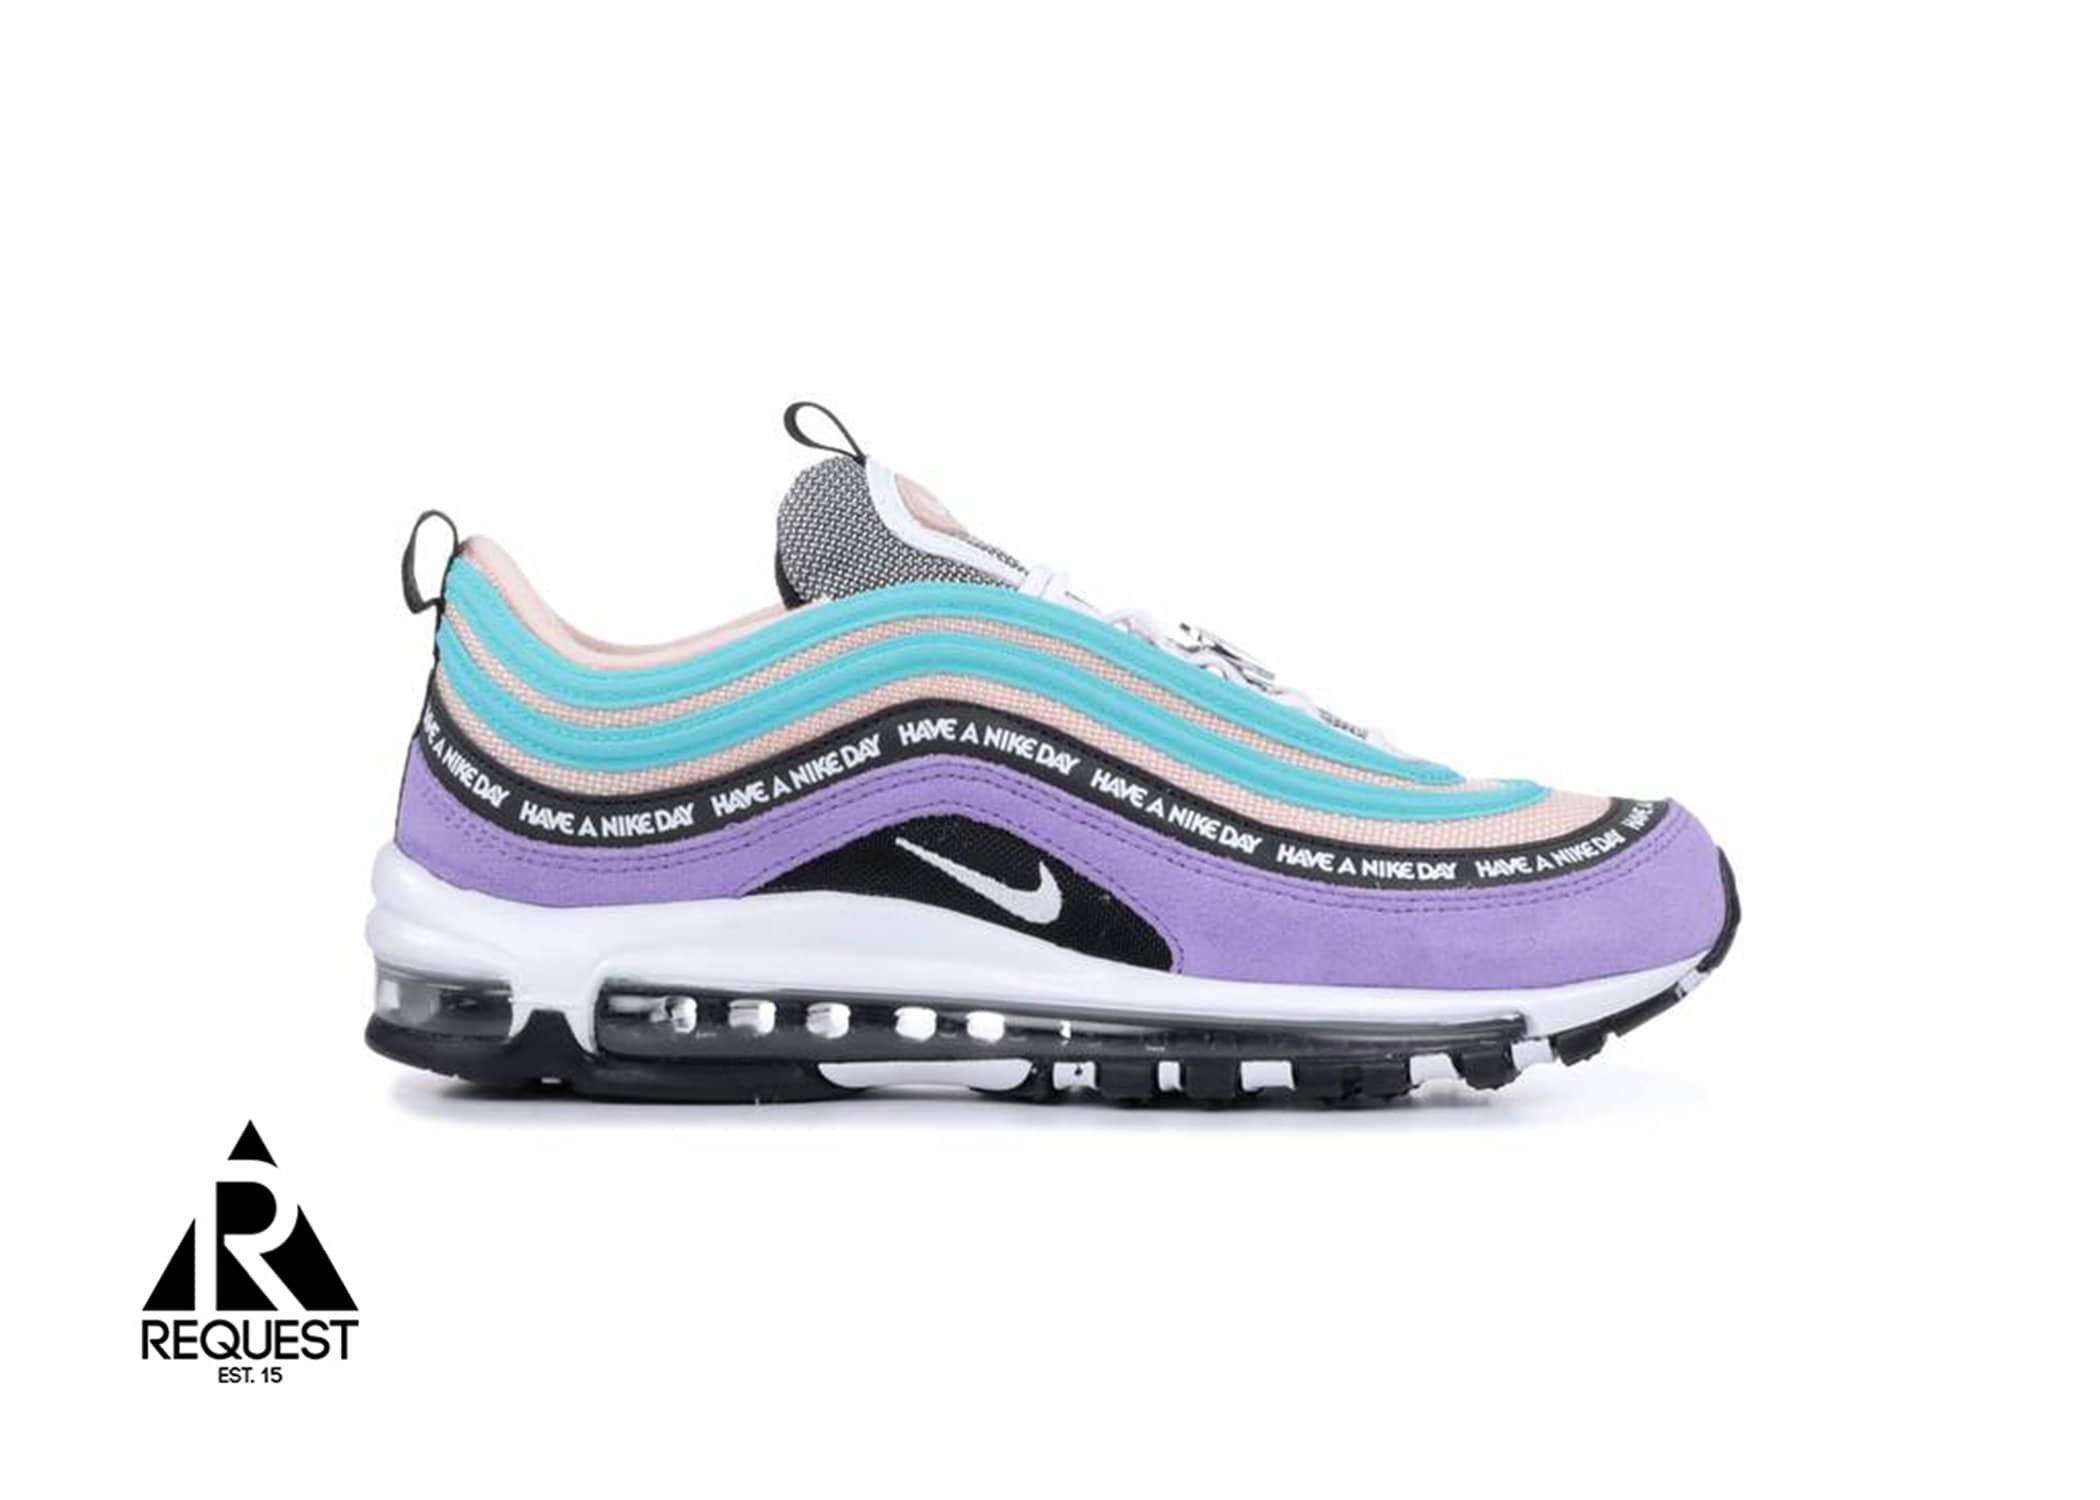 Air Max 97 “Have A Nike Day”